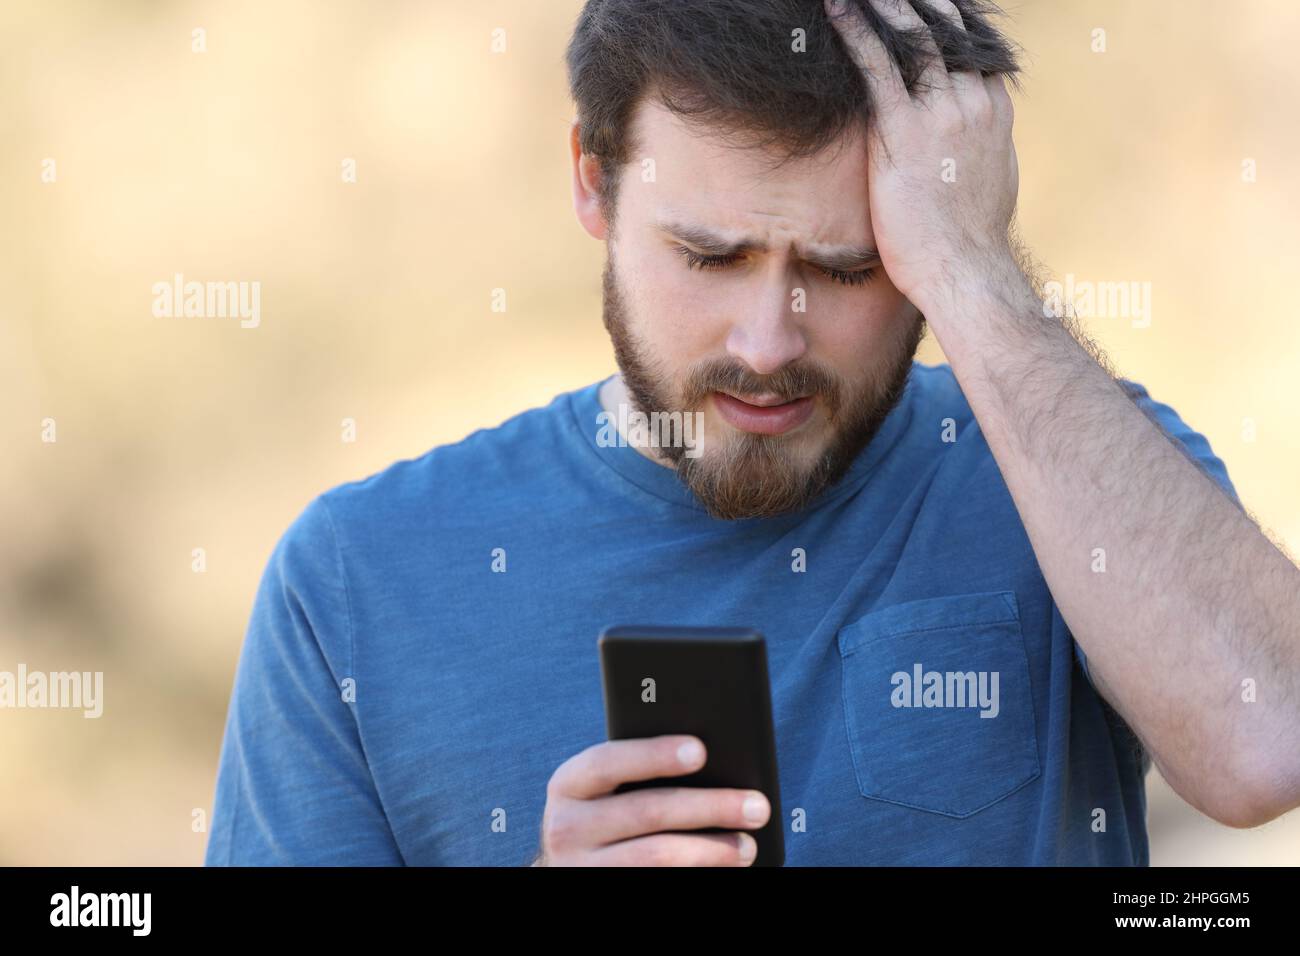 Front view portrait of a worried man checking smartphone outdoors Stock Photo